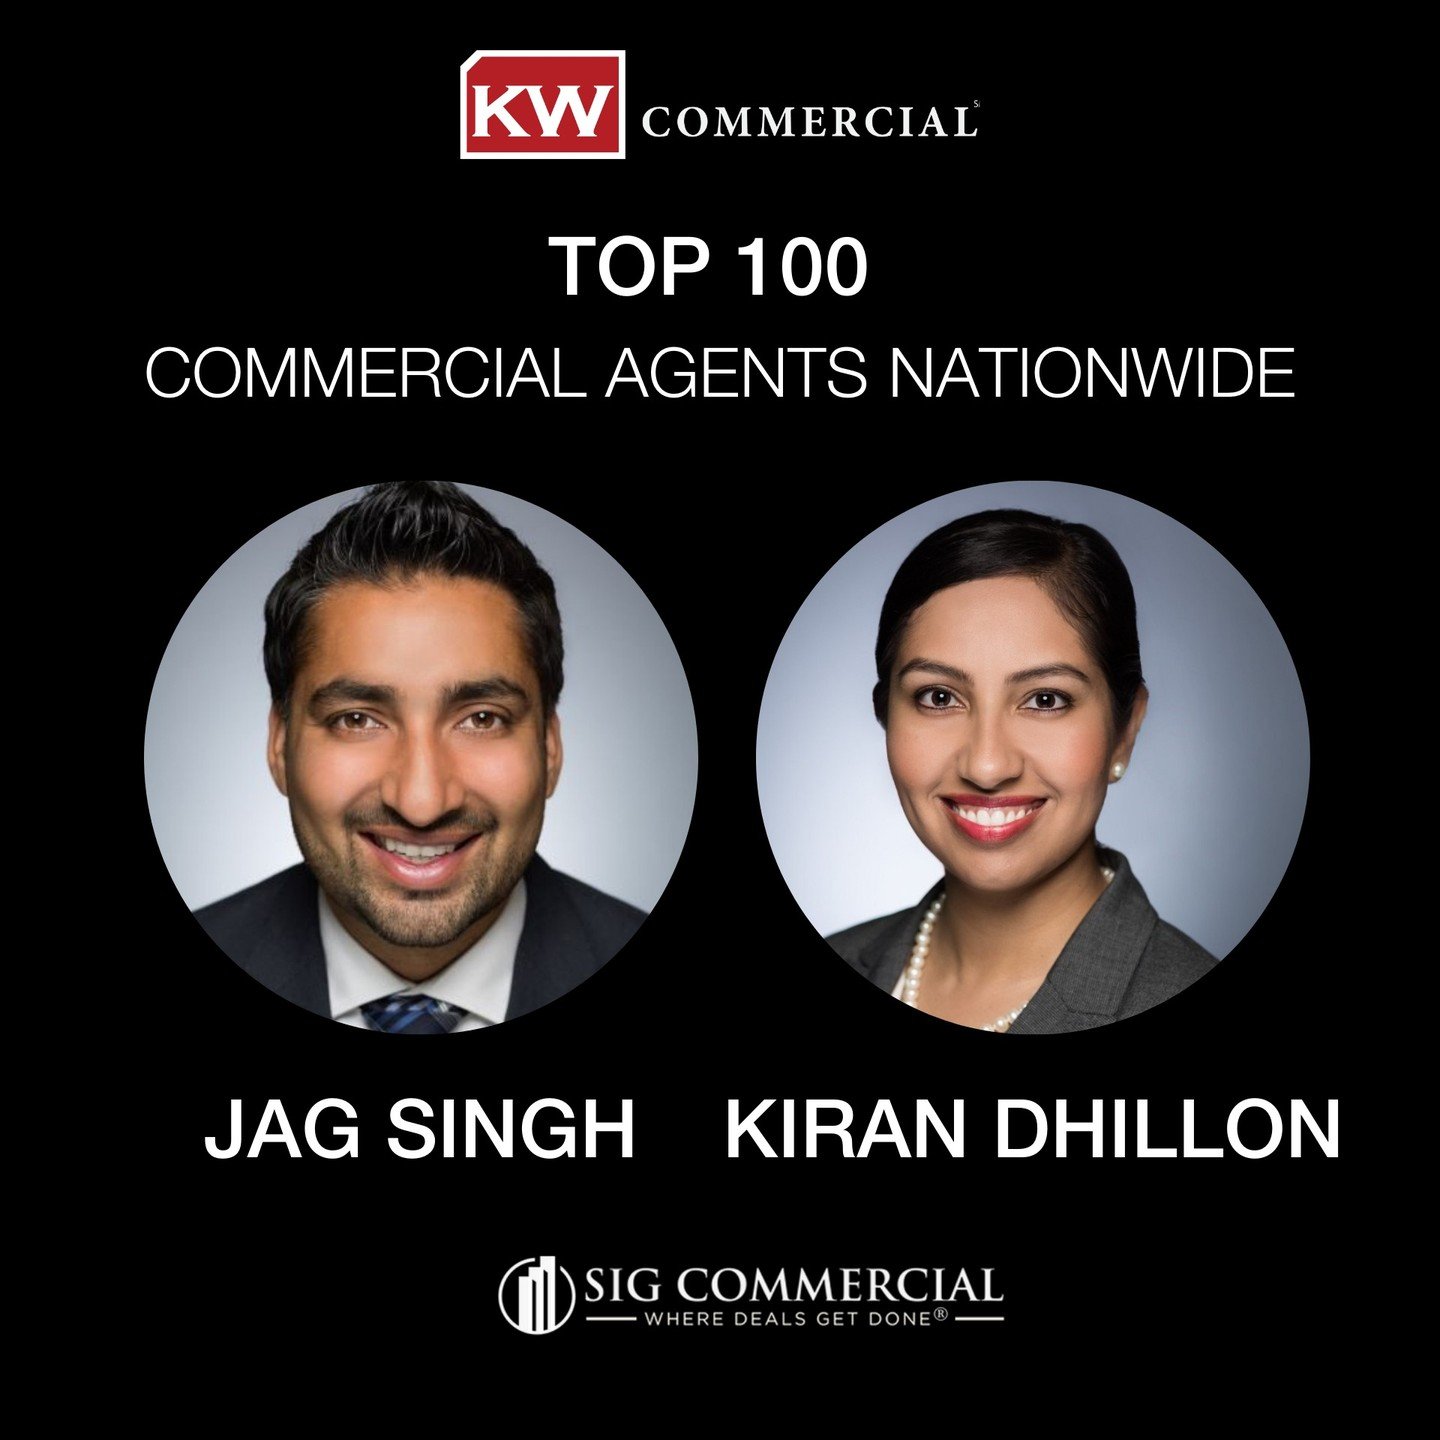 Congratulations to the Keller Williams Commercial Pasadena Team, JAG SINGH of SIG COMMERCIAL, for making the TOP 100 list Nationwide of Commercial Real Estate Agents. We are grateful for being in business with you.

Keller Williams Pasadena Voted #1 